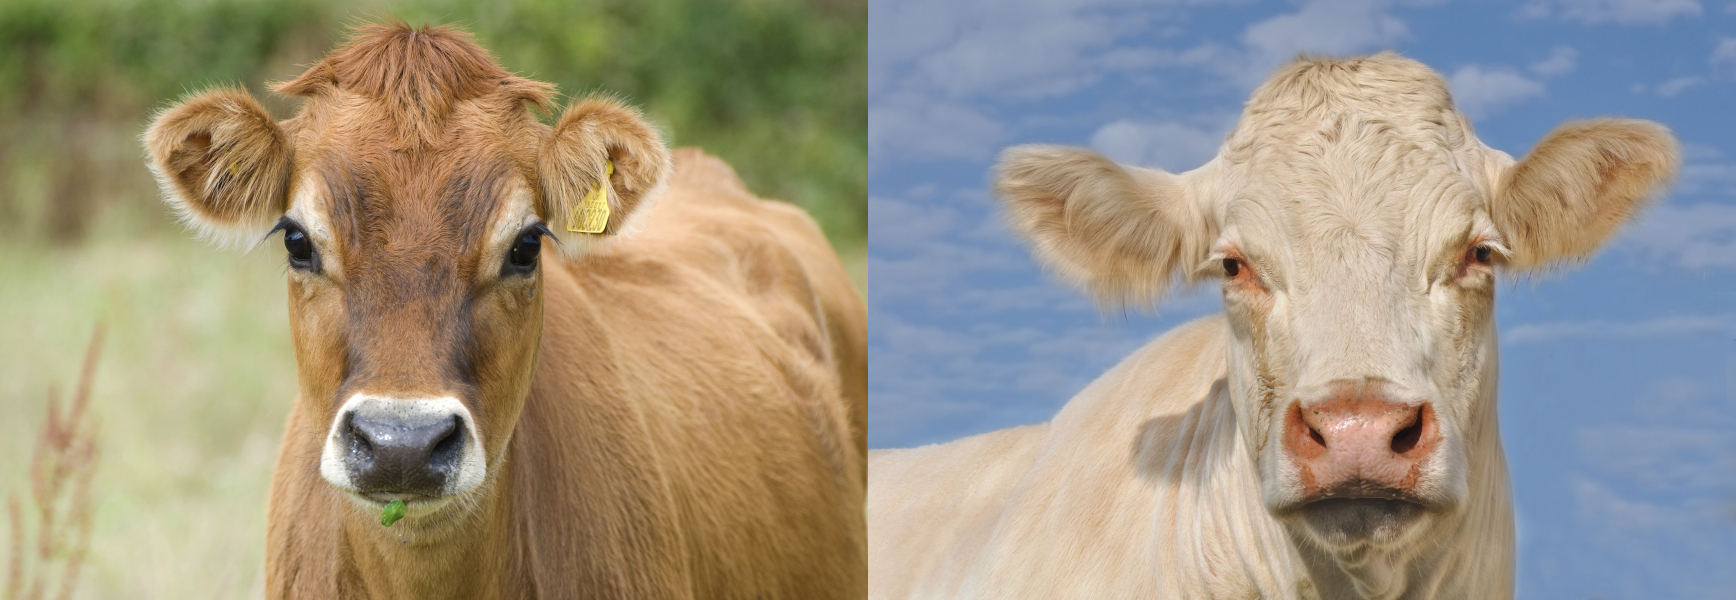 Jersey cow on left (Friesian-derived breed), Charolais cow on right (Celtic-derived breed)